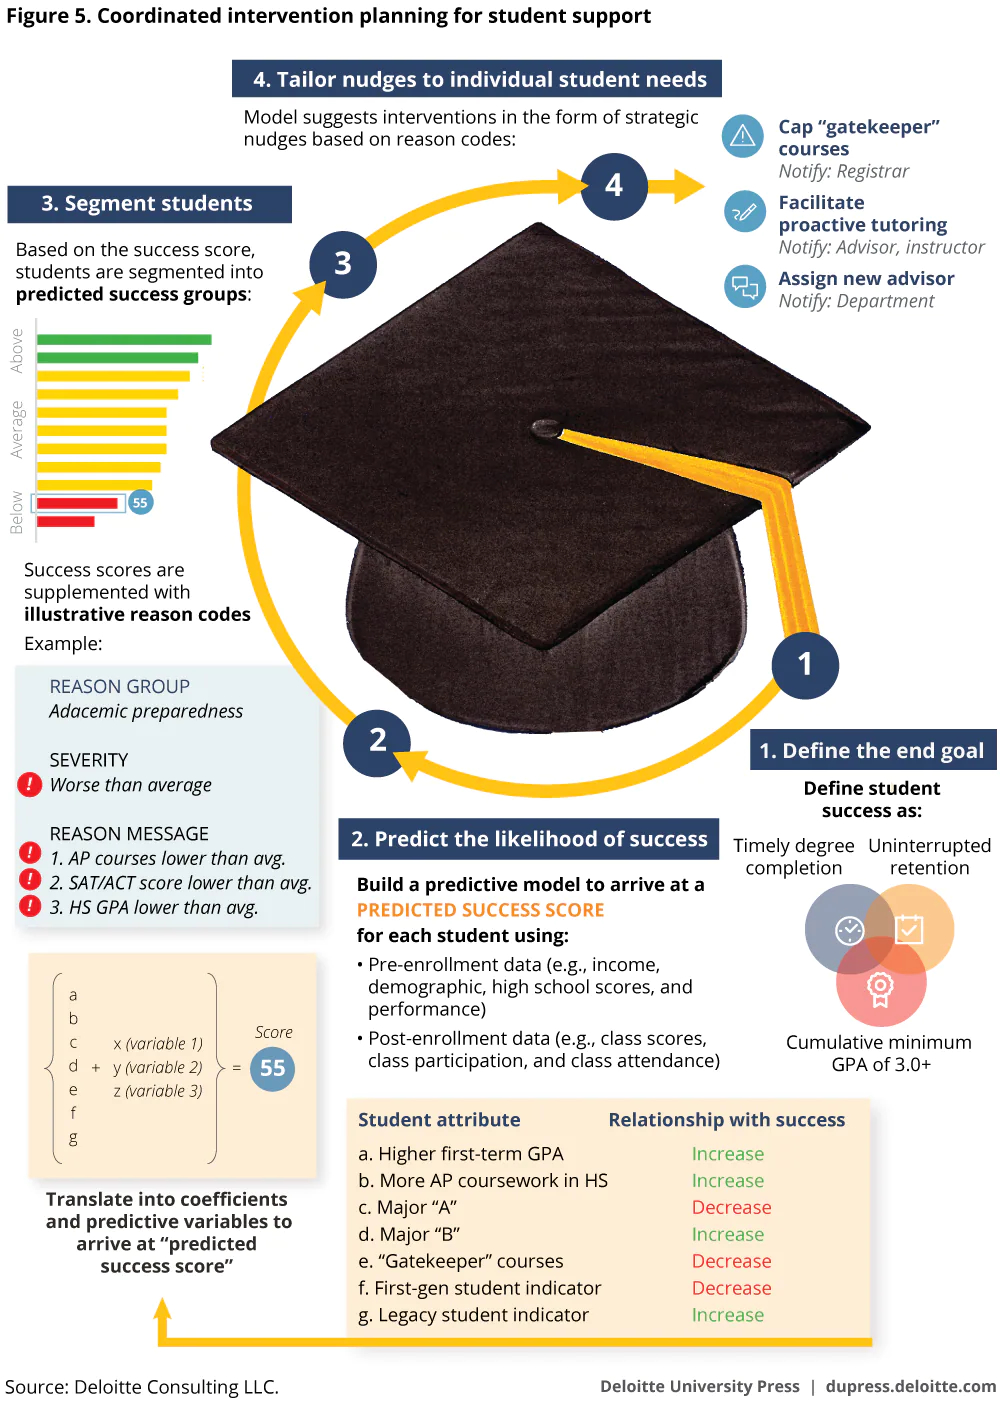 Improving student success in higher education | Deloitte Insights